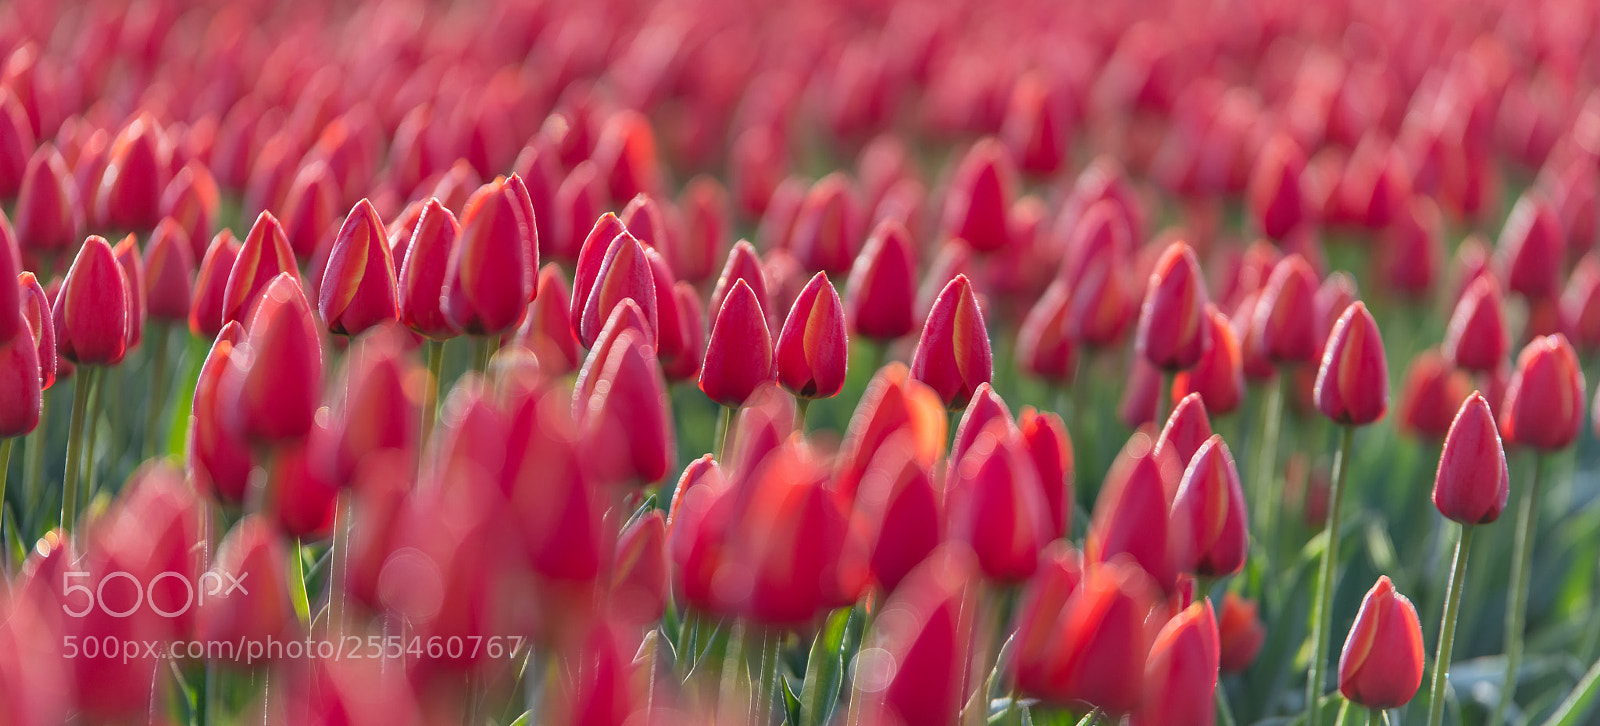 Nikon D850 sample photo. A field of red photography